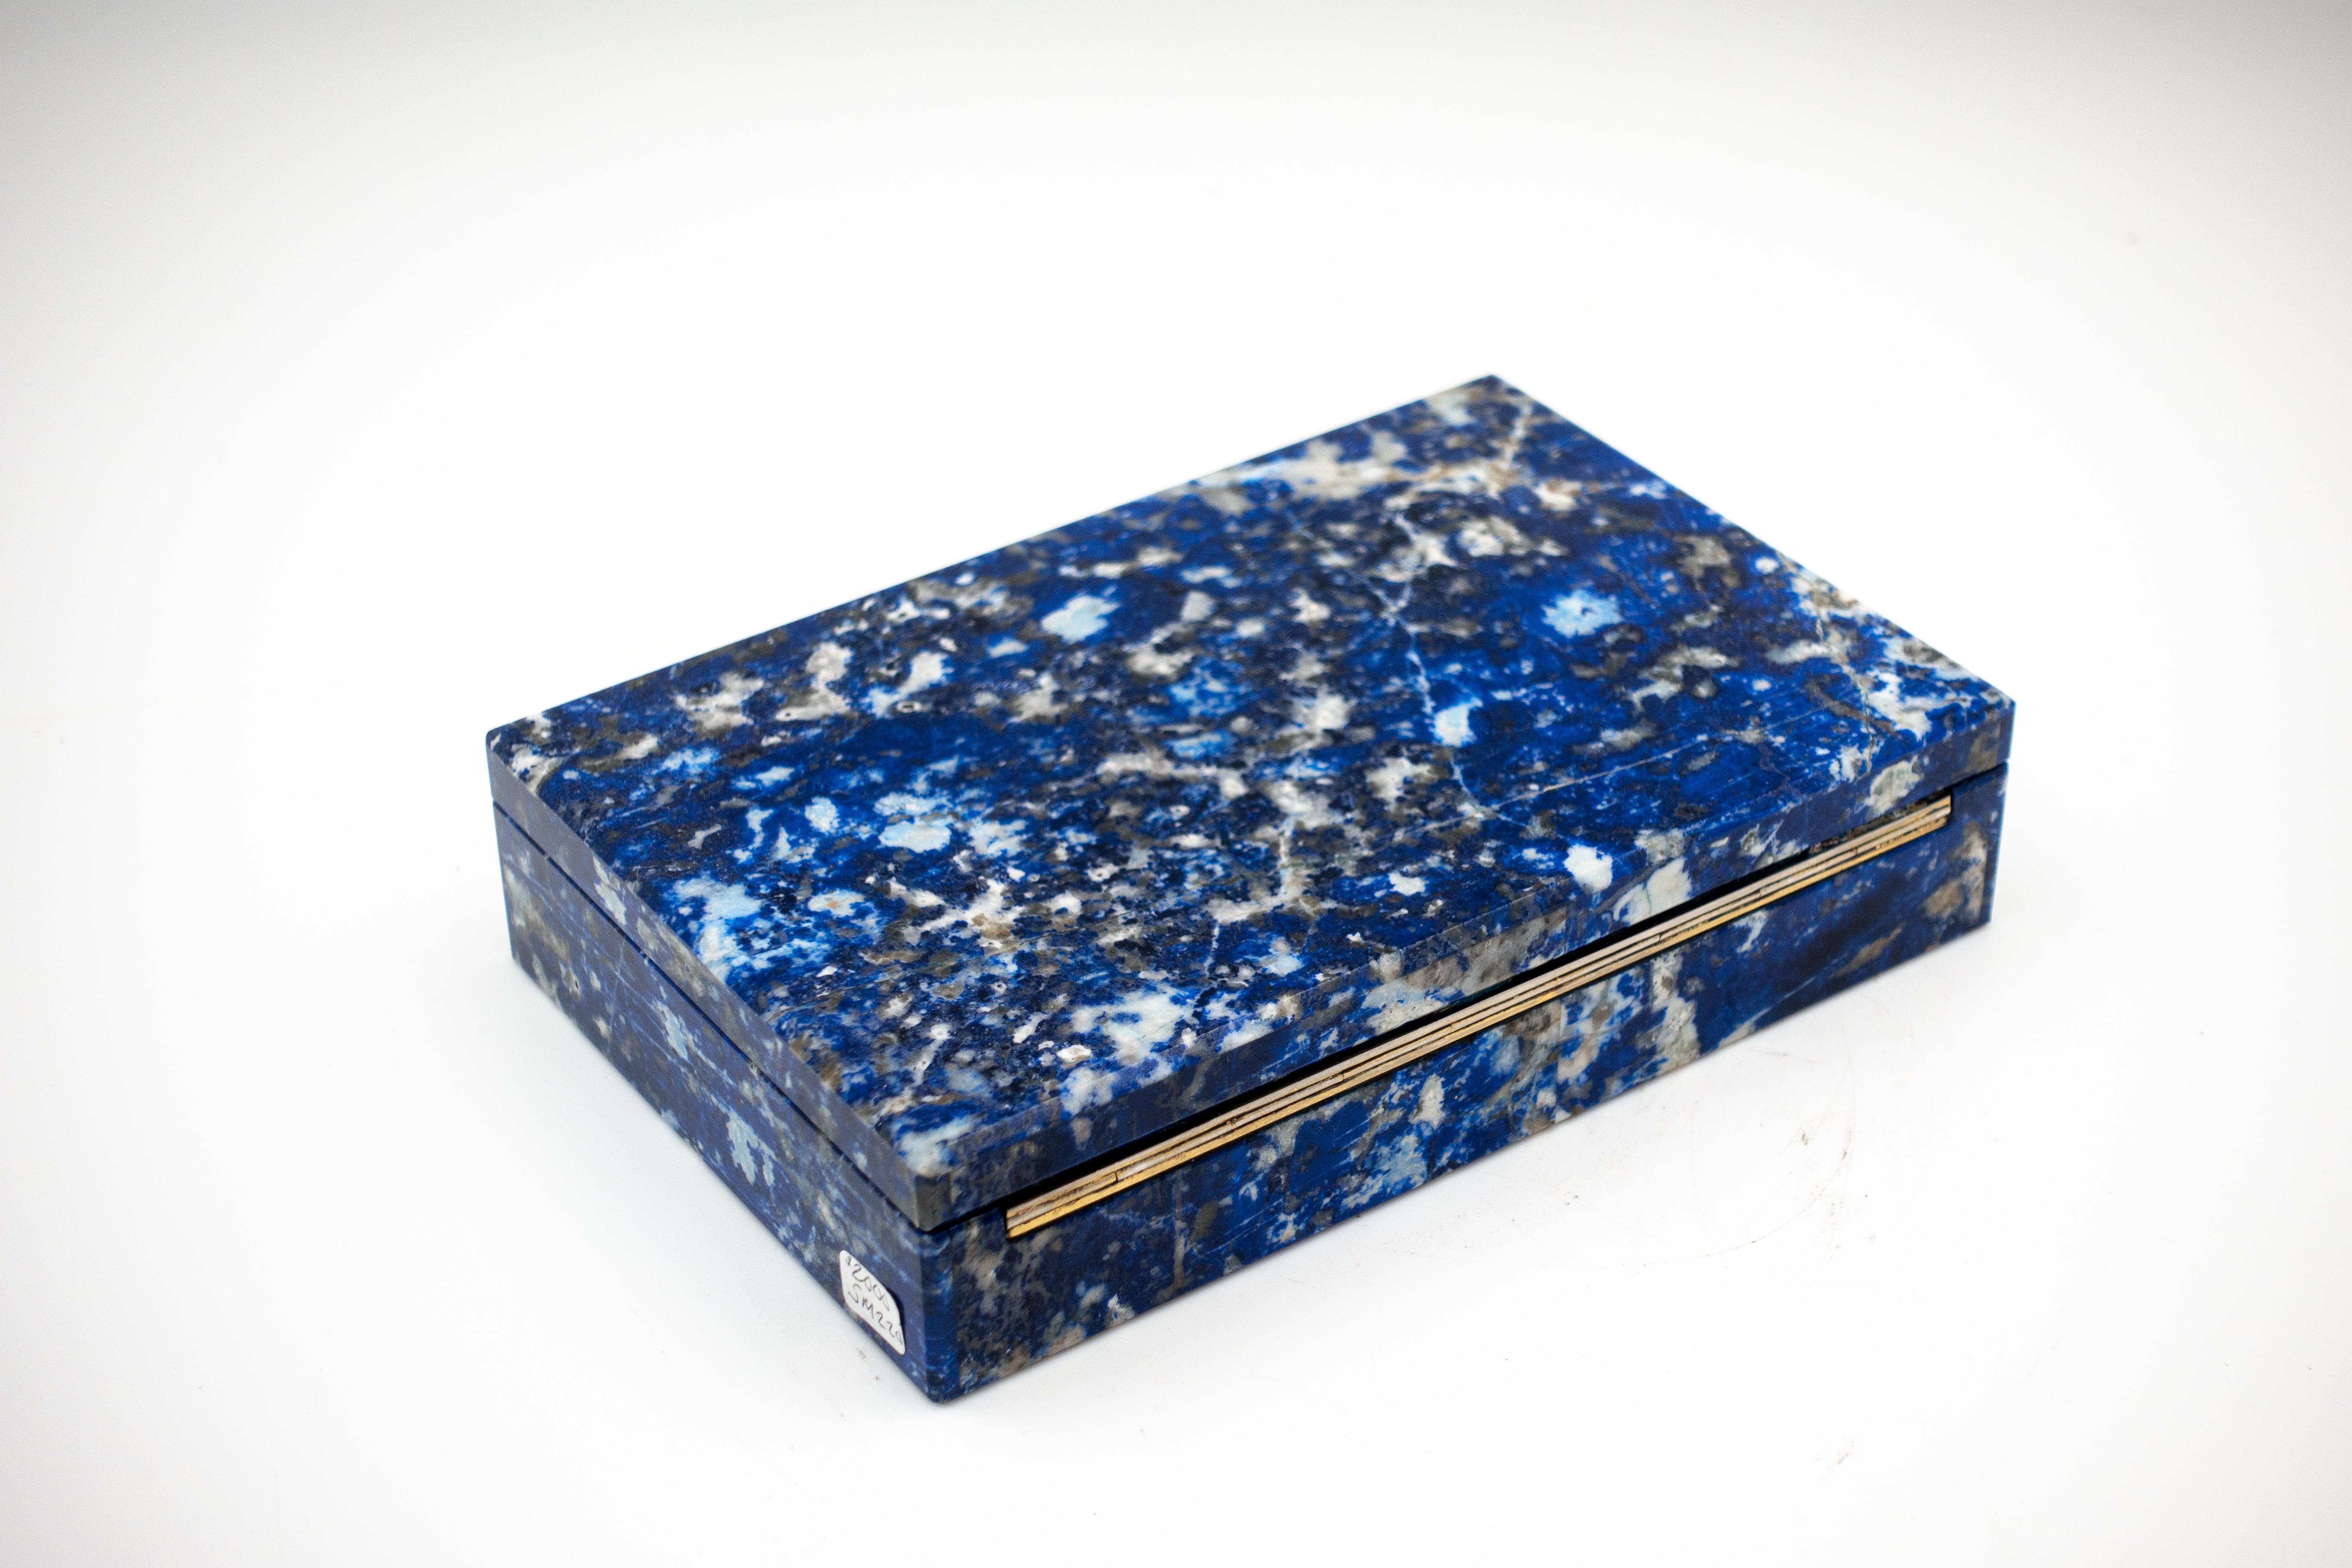 Beautiful Sodalite box with hinged lid. Sodalite is a rich royal blue tectosilicate mineral widely used as an ornamental gemstone.  Sodalite is believed to encourage rational thought, objectivity, truth and intuition, along with verbalisation of